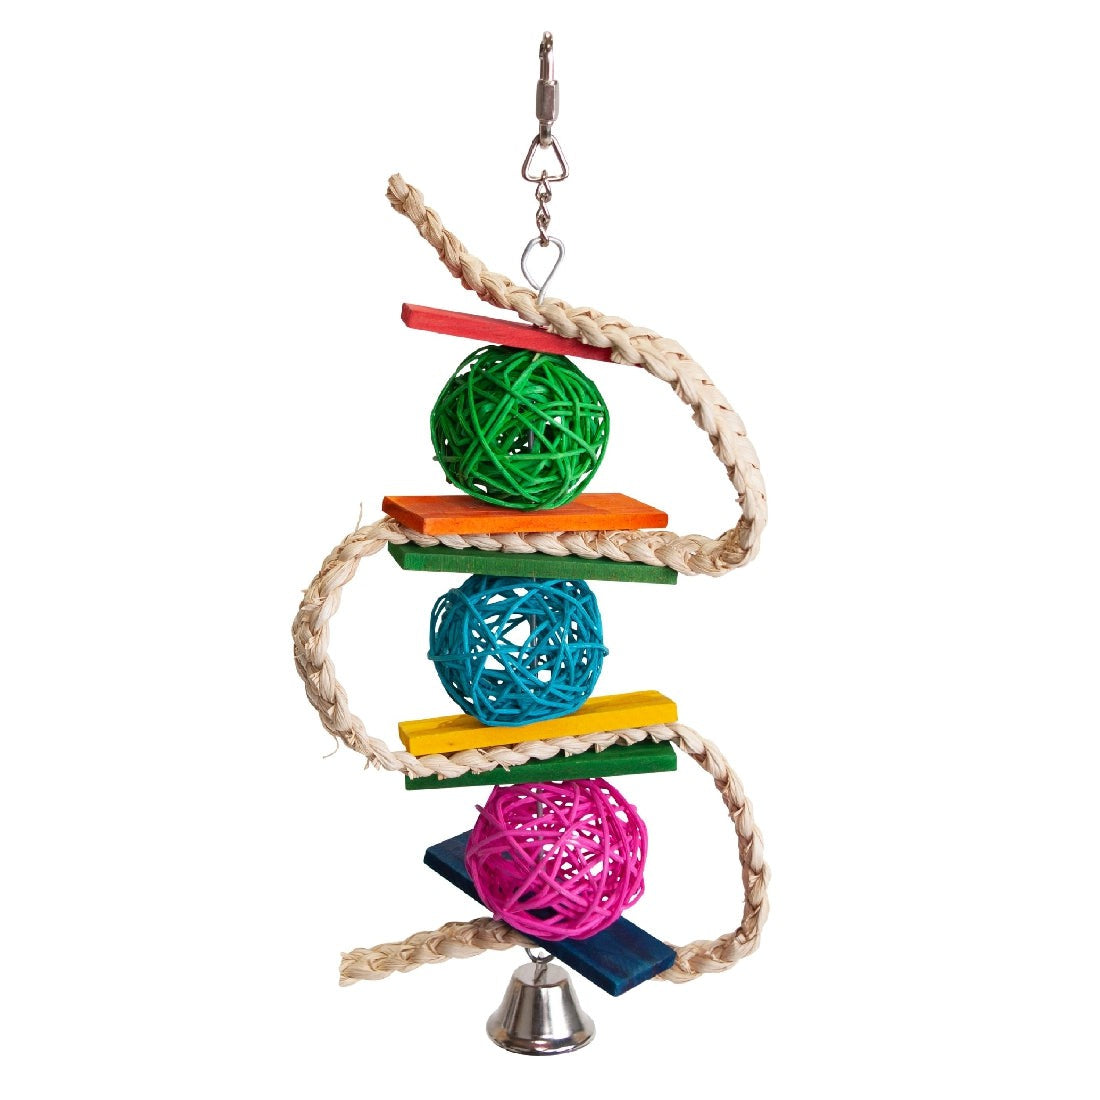 Colorful hanging bird toy with ropes, wooden pieces, and rattan balls.